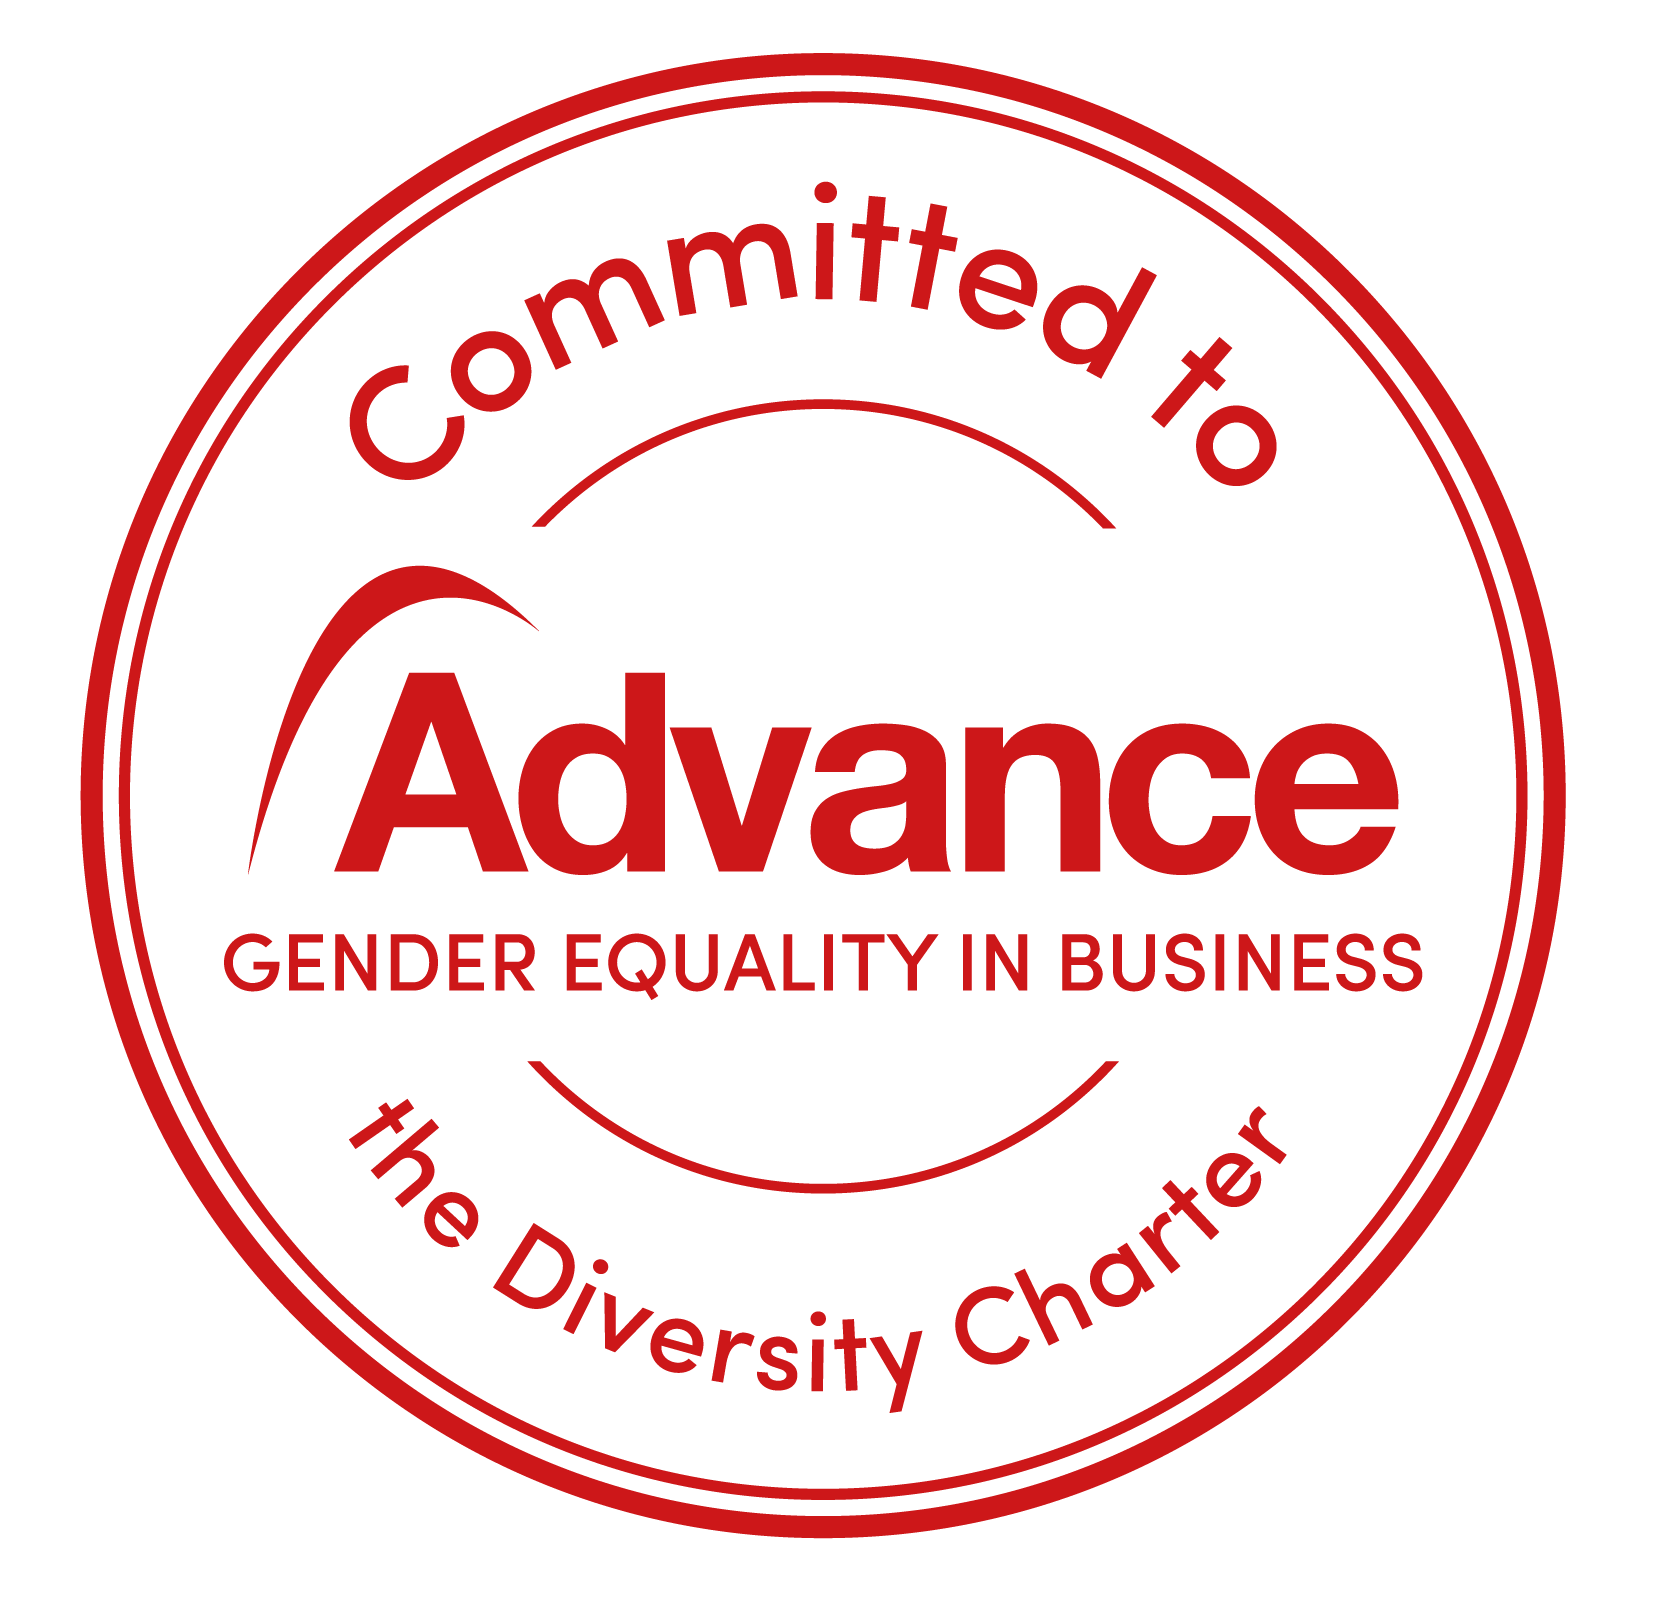 The Diversity Charter